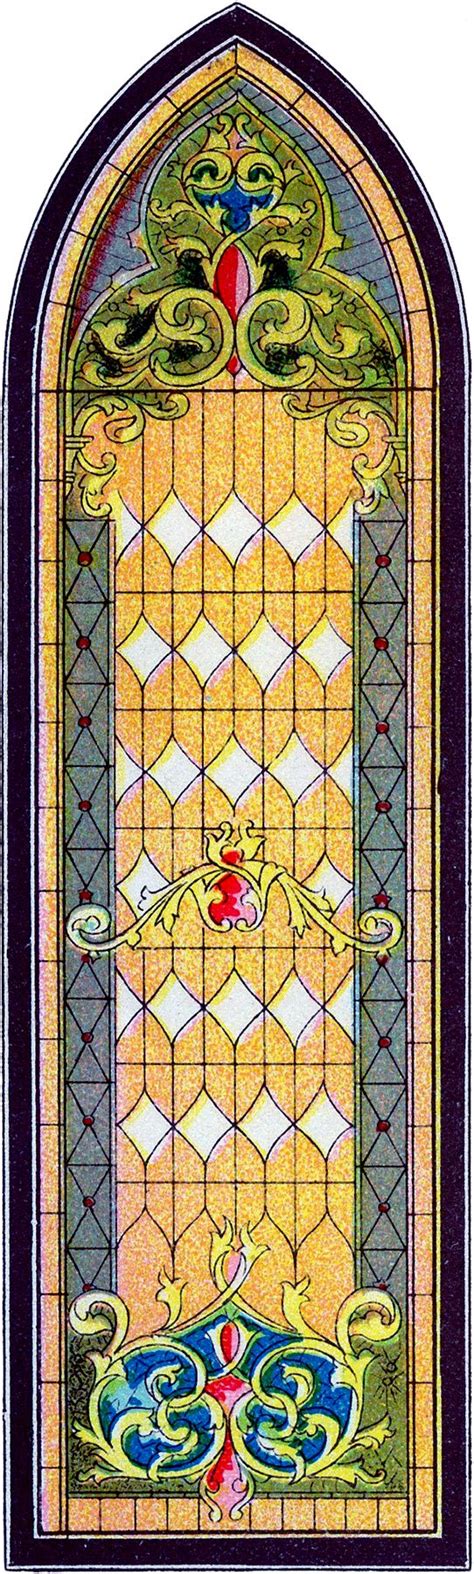 Vintage Stained Glass Church Window Image The Graphics Fairy Stained Glass Church Stained